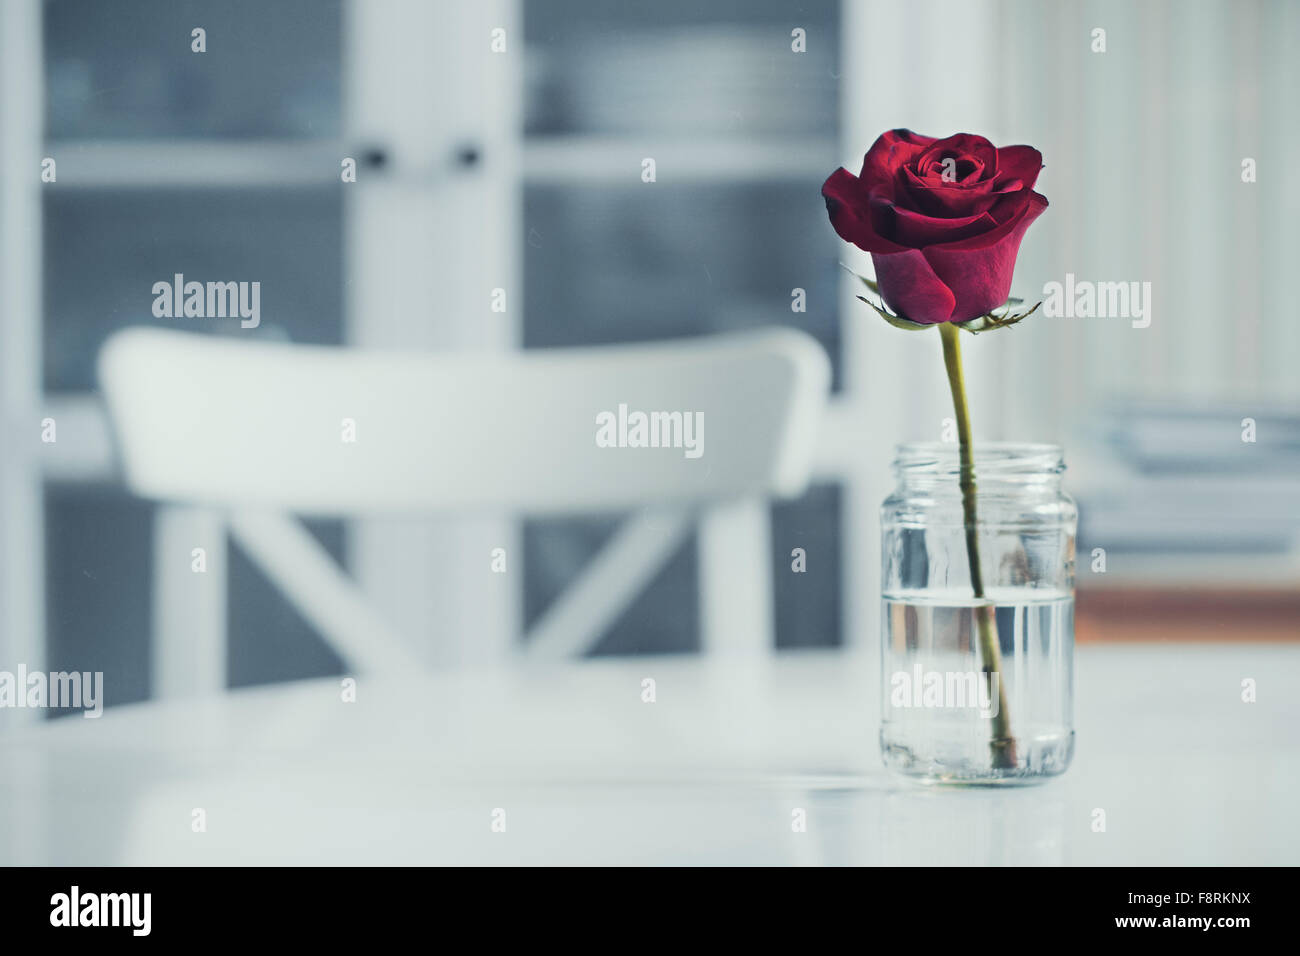 Rose in a glass jar on dining room table Stock Photo